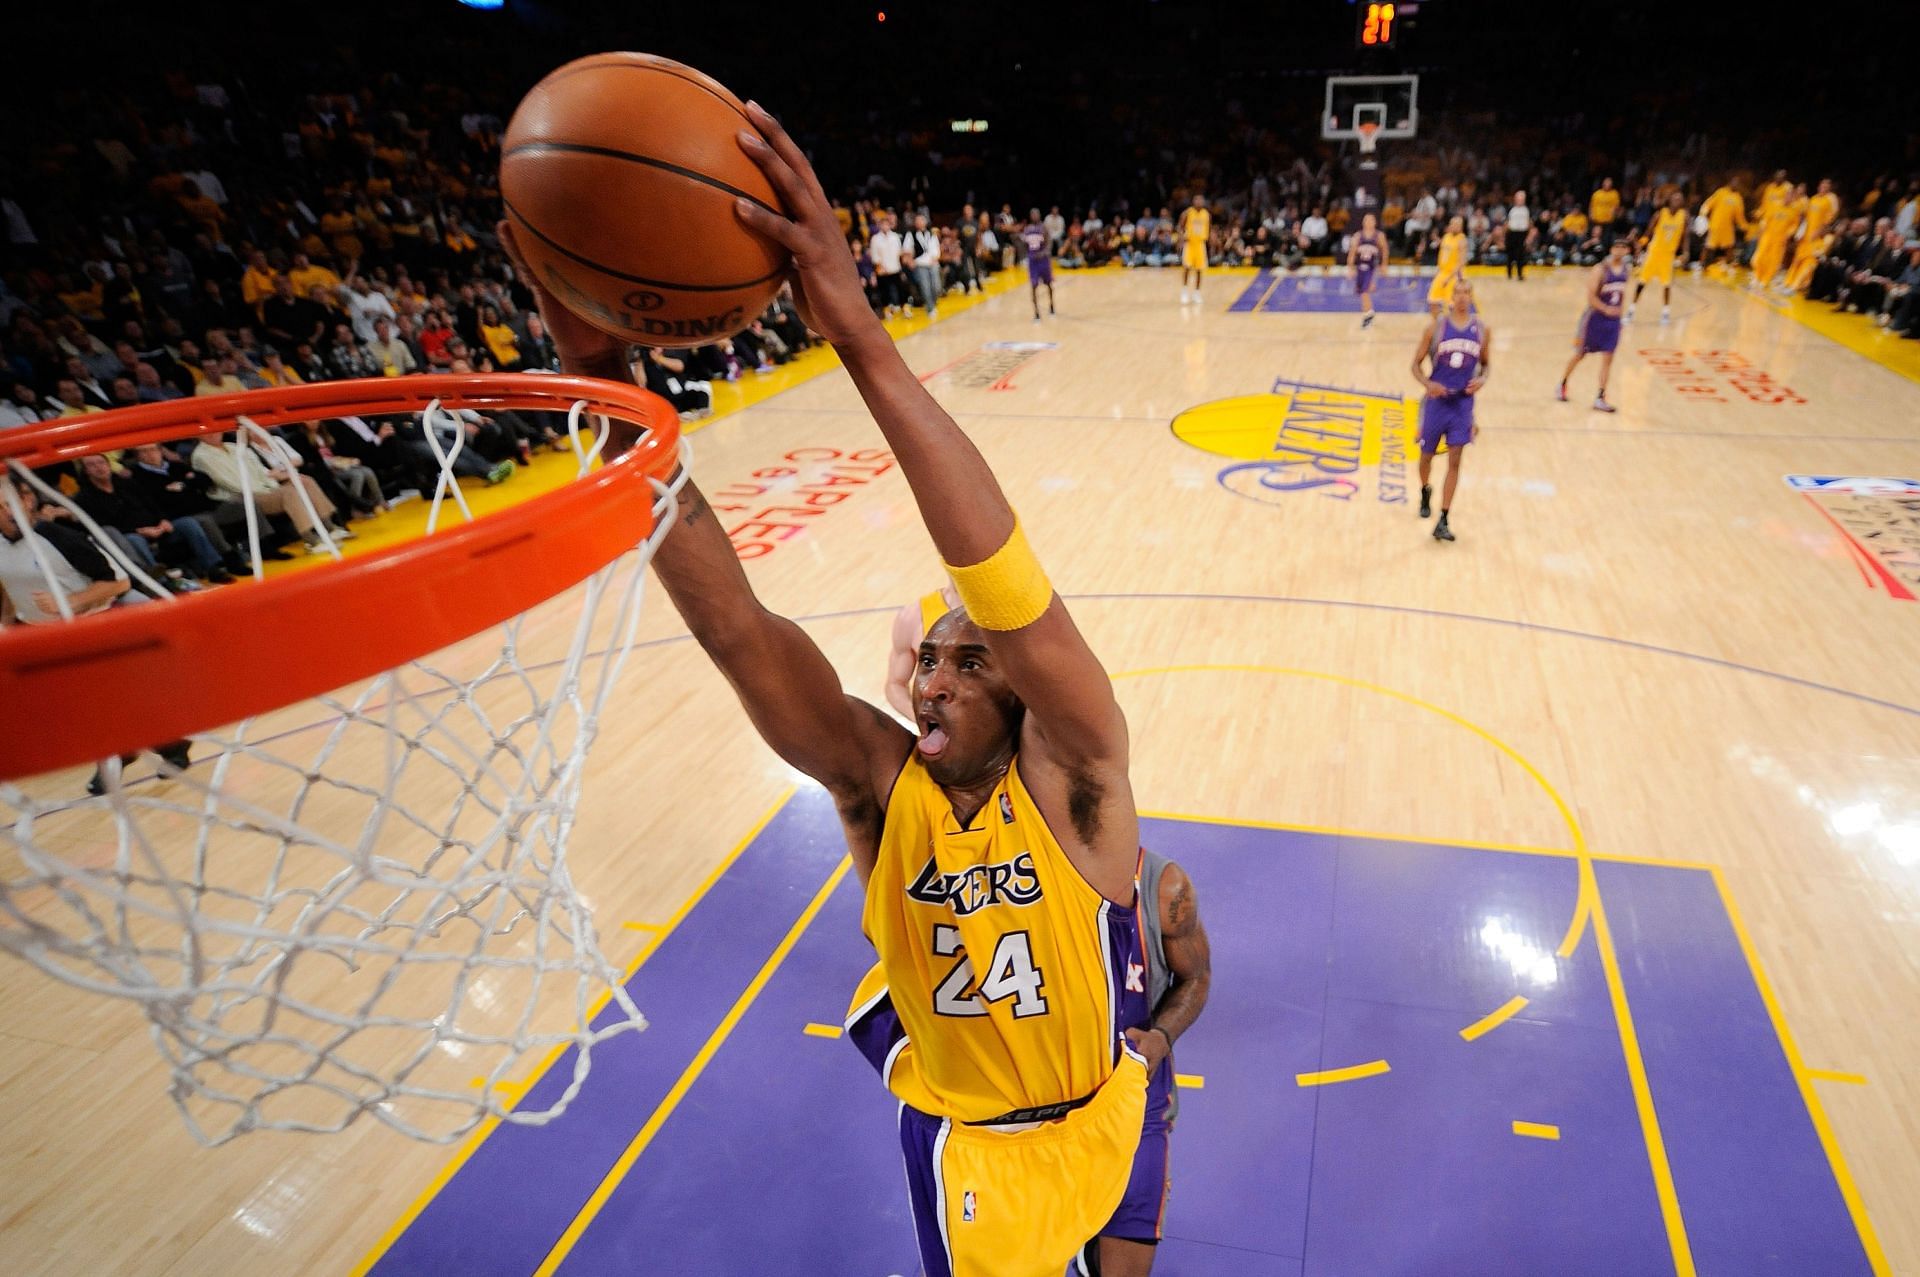 Kobe Bryant of the Los Angeles Lakers dunks the ball against the Phoenix Suns.